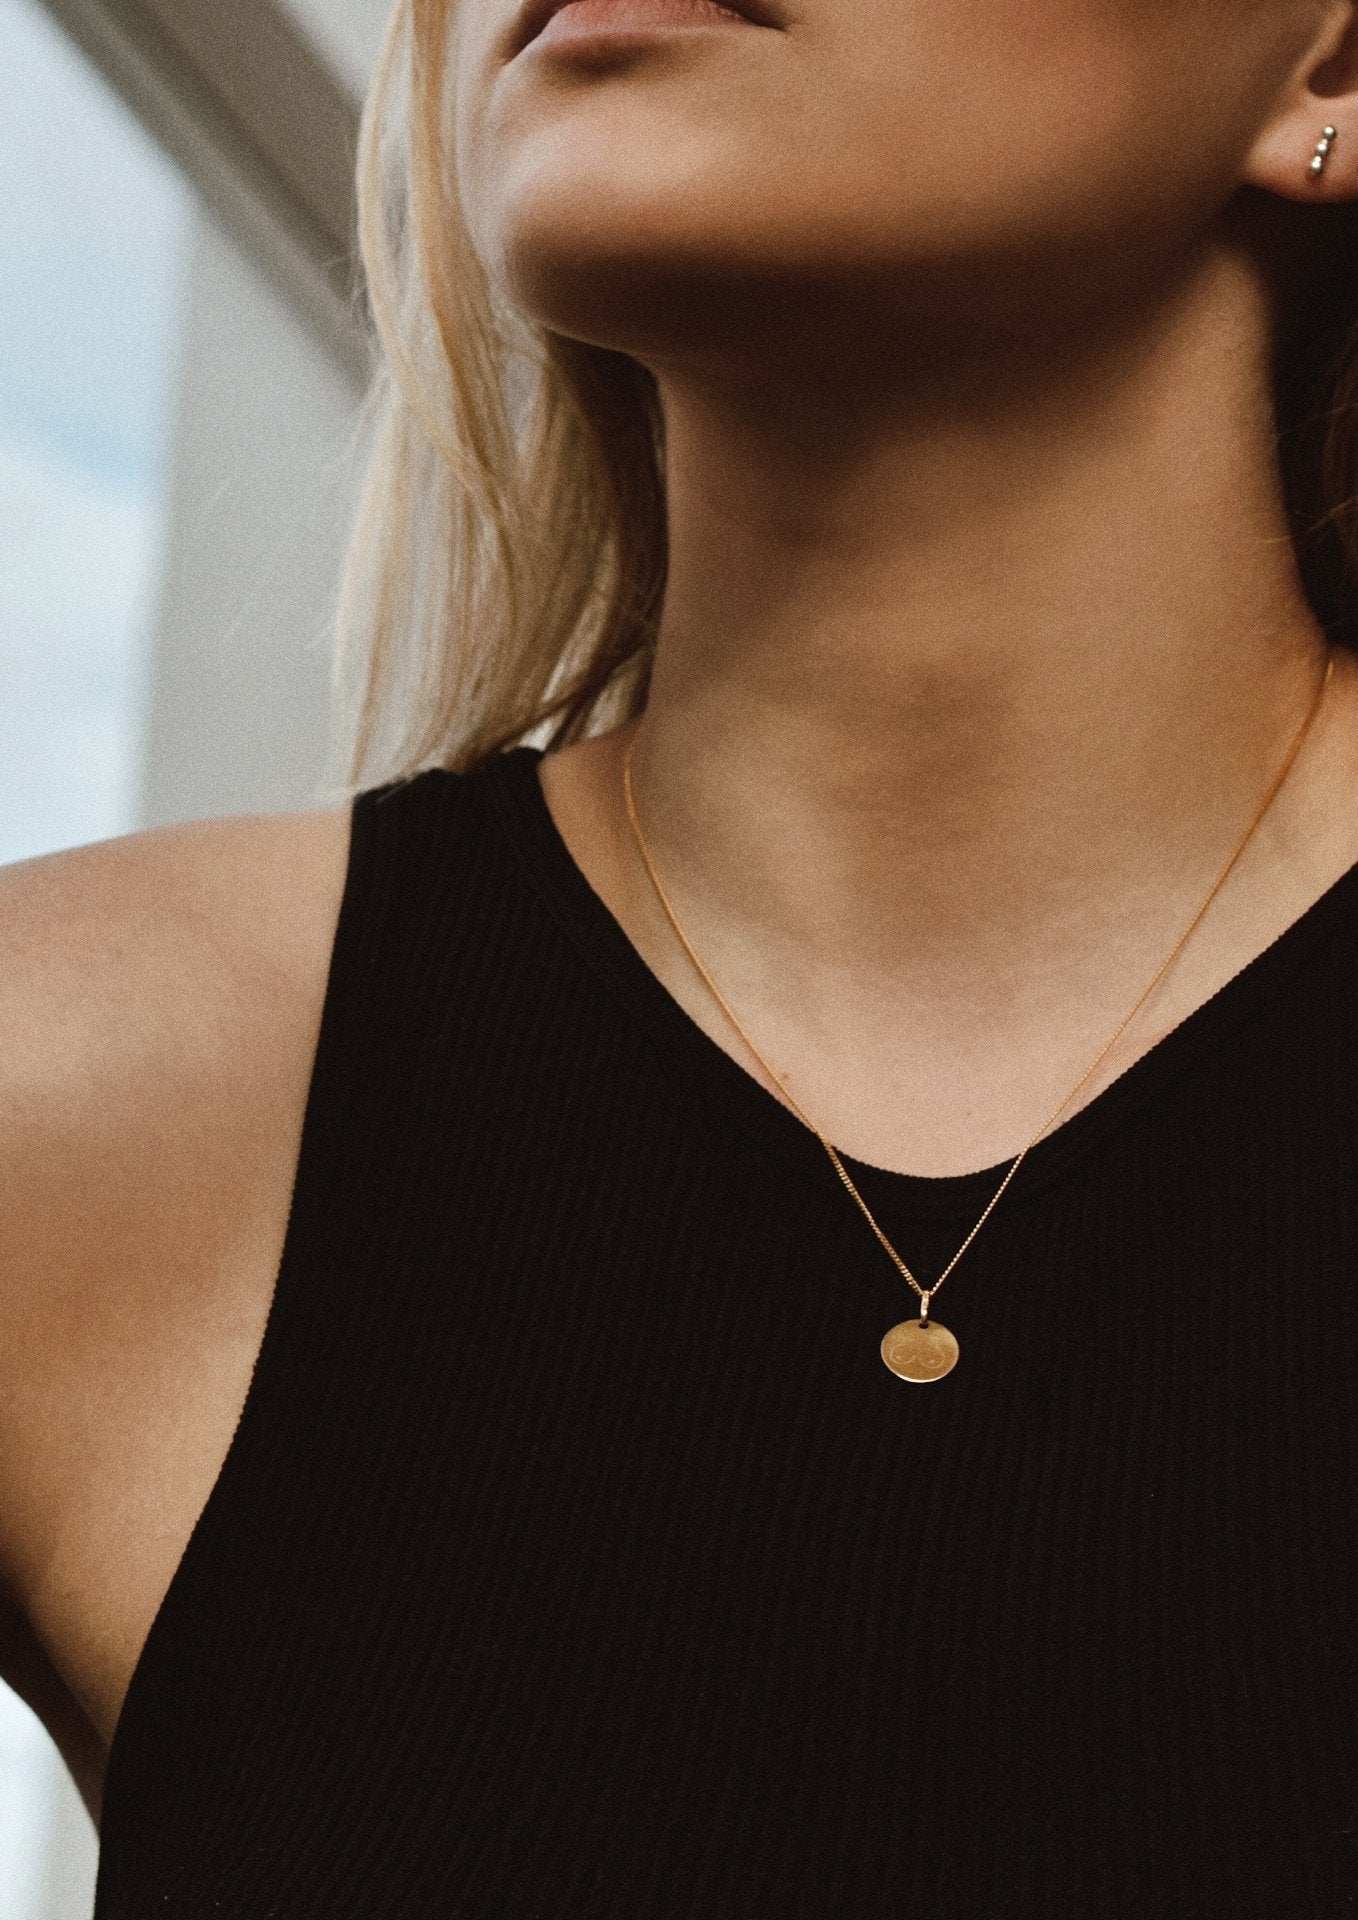 Boobs Necklace Gold - NO MORE ACCESSORIES